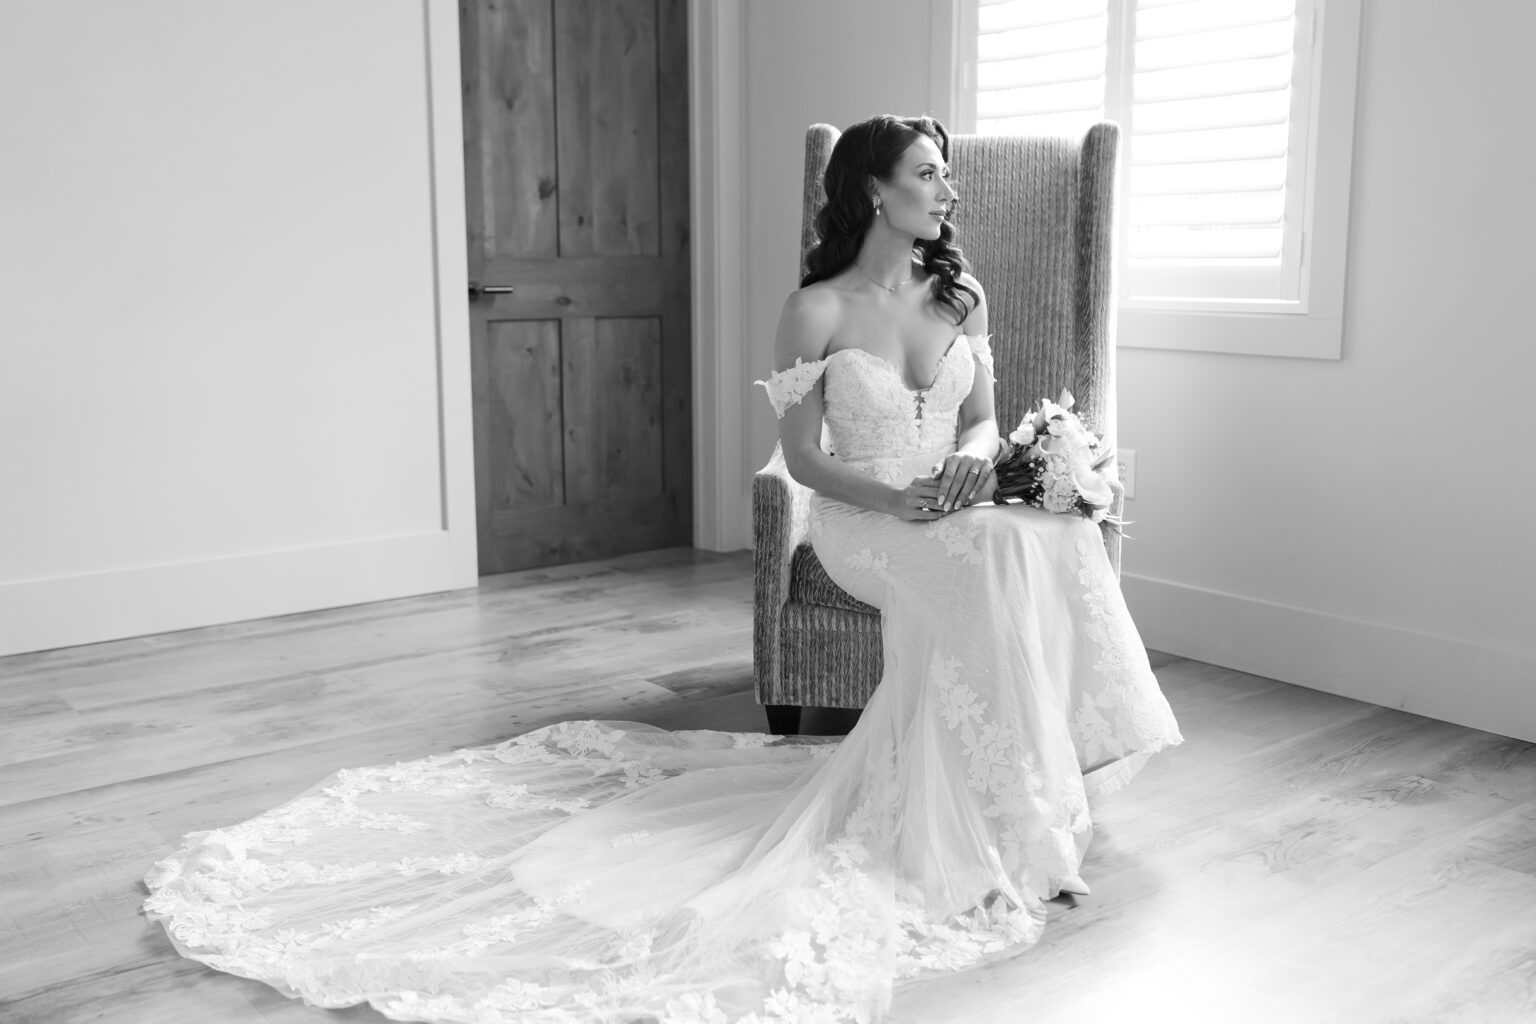 A bride sitting in her wedding dress on the floor